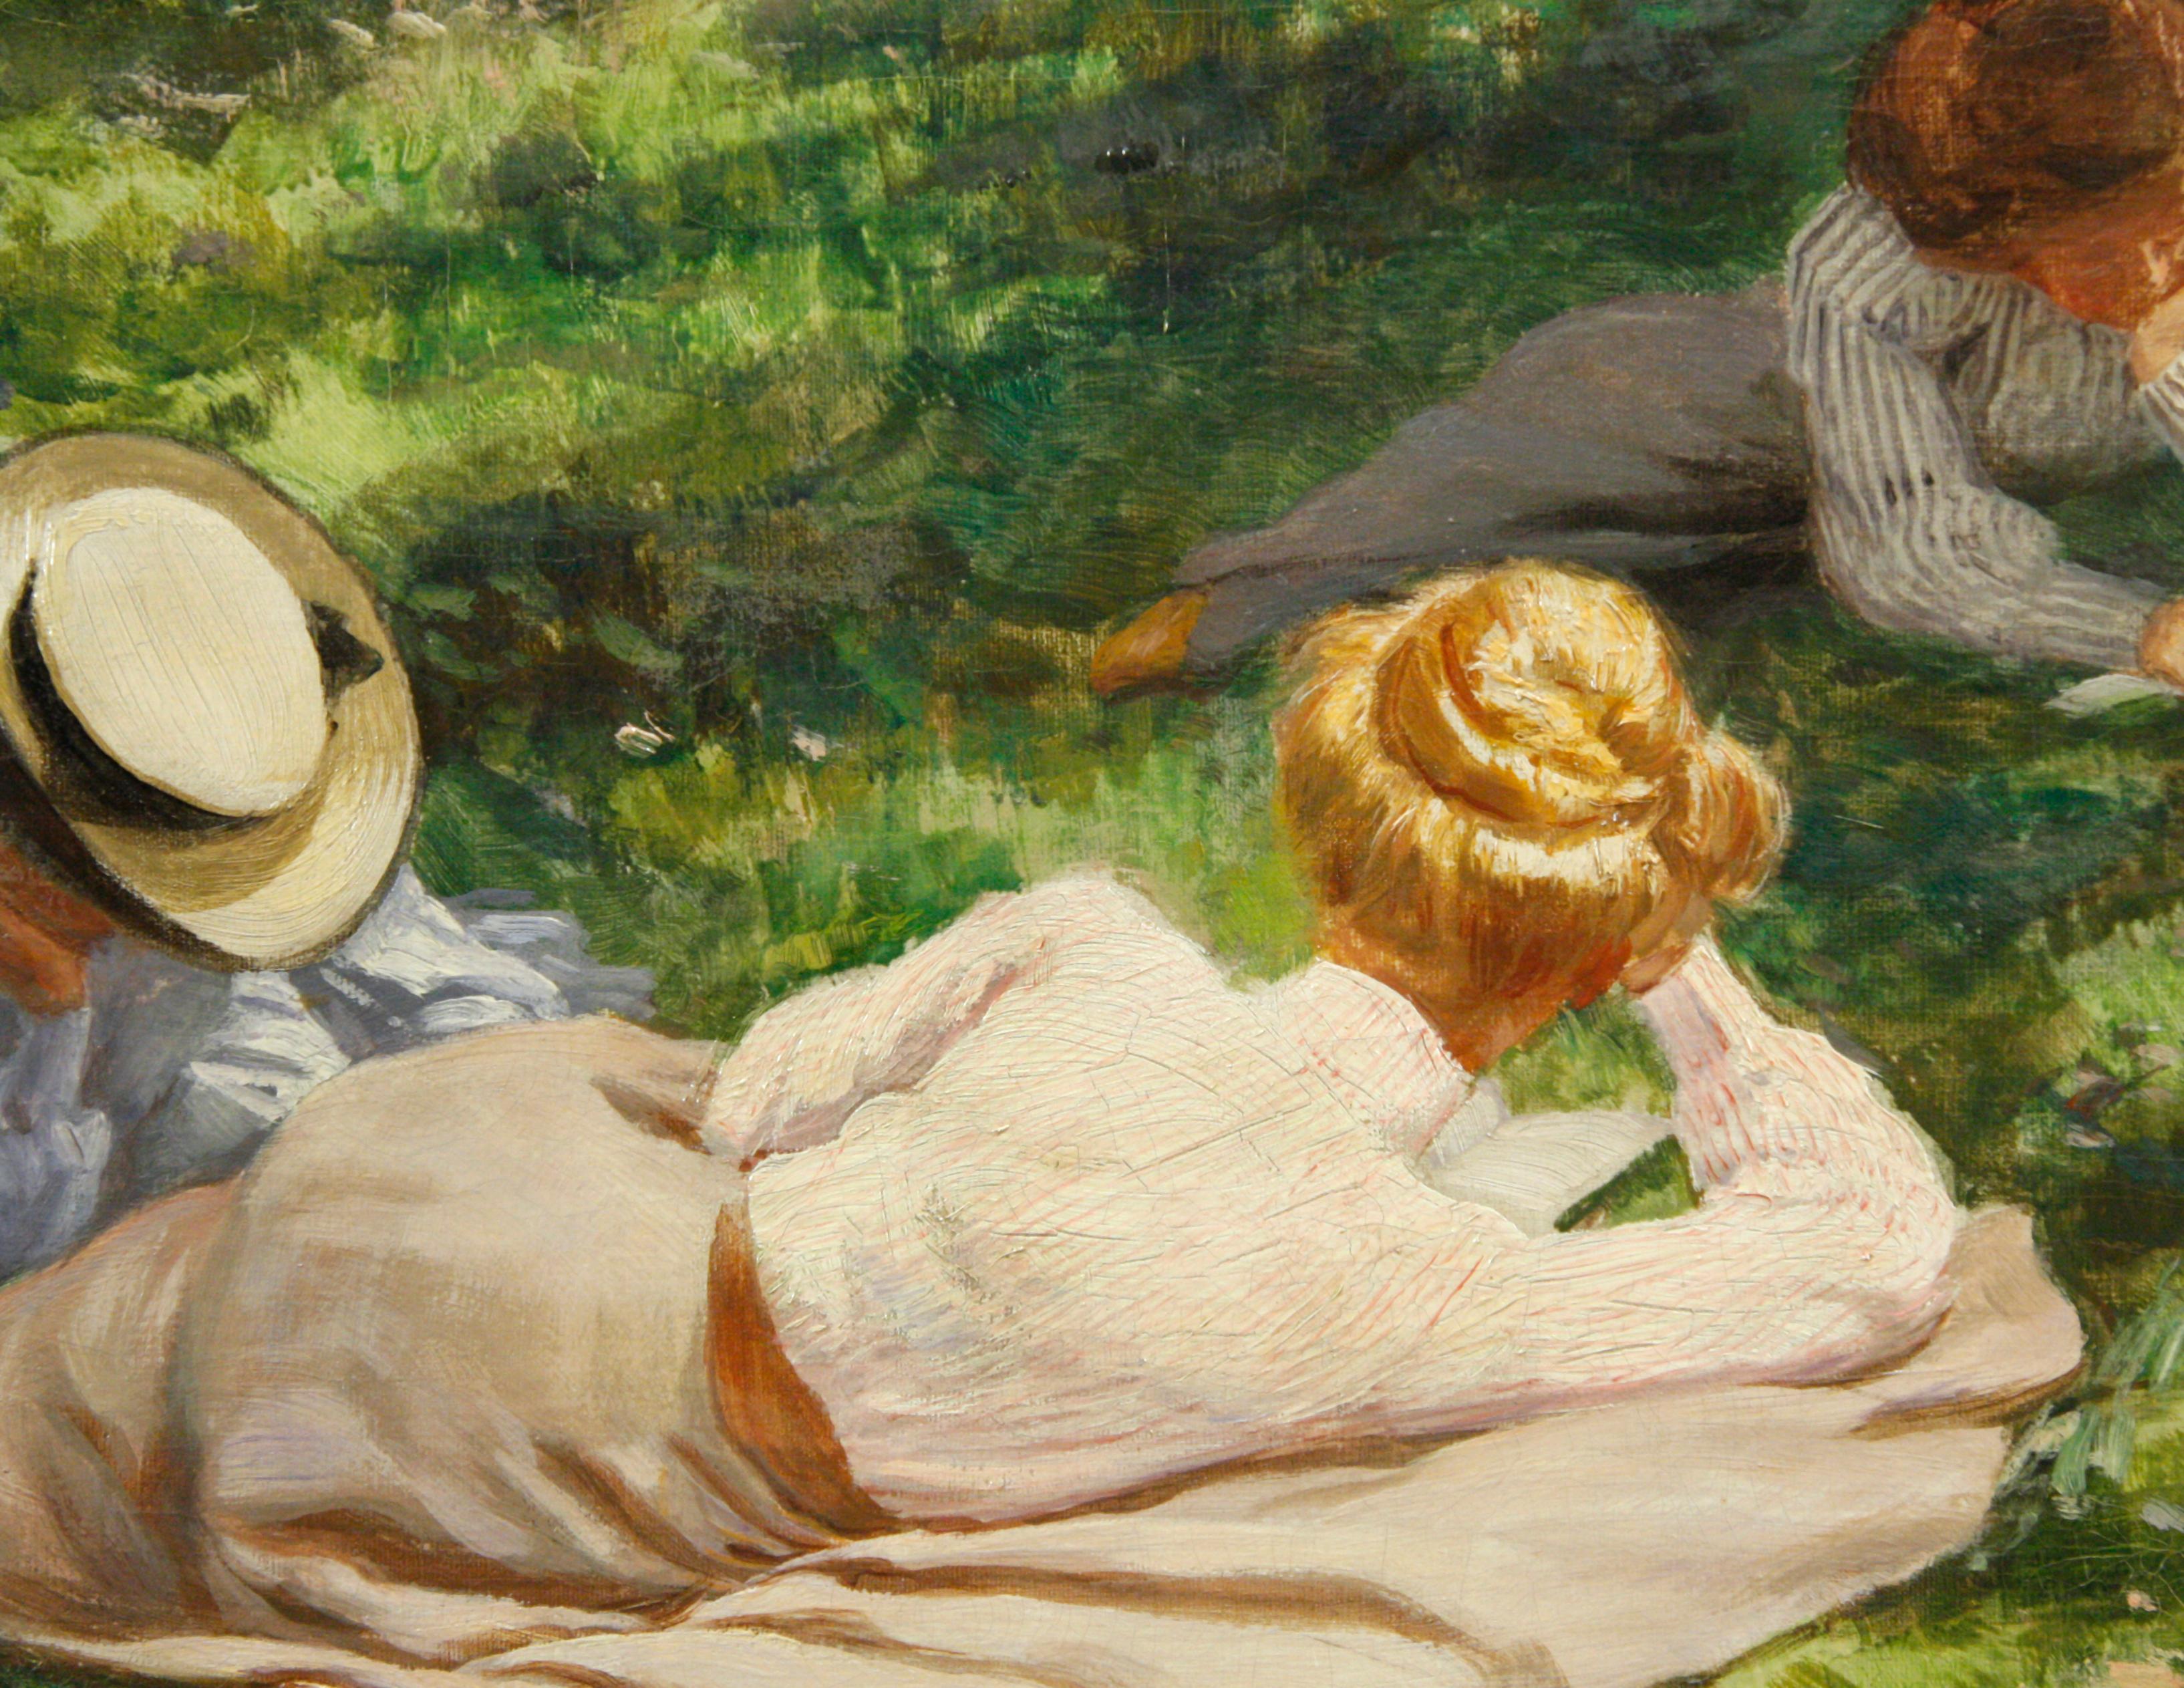 A Summer Afternoon Rest  - Painting by Johan Krouthen